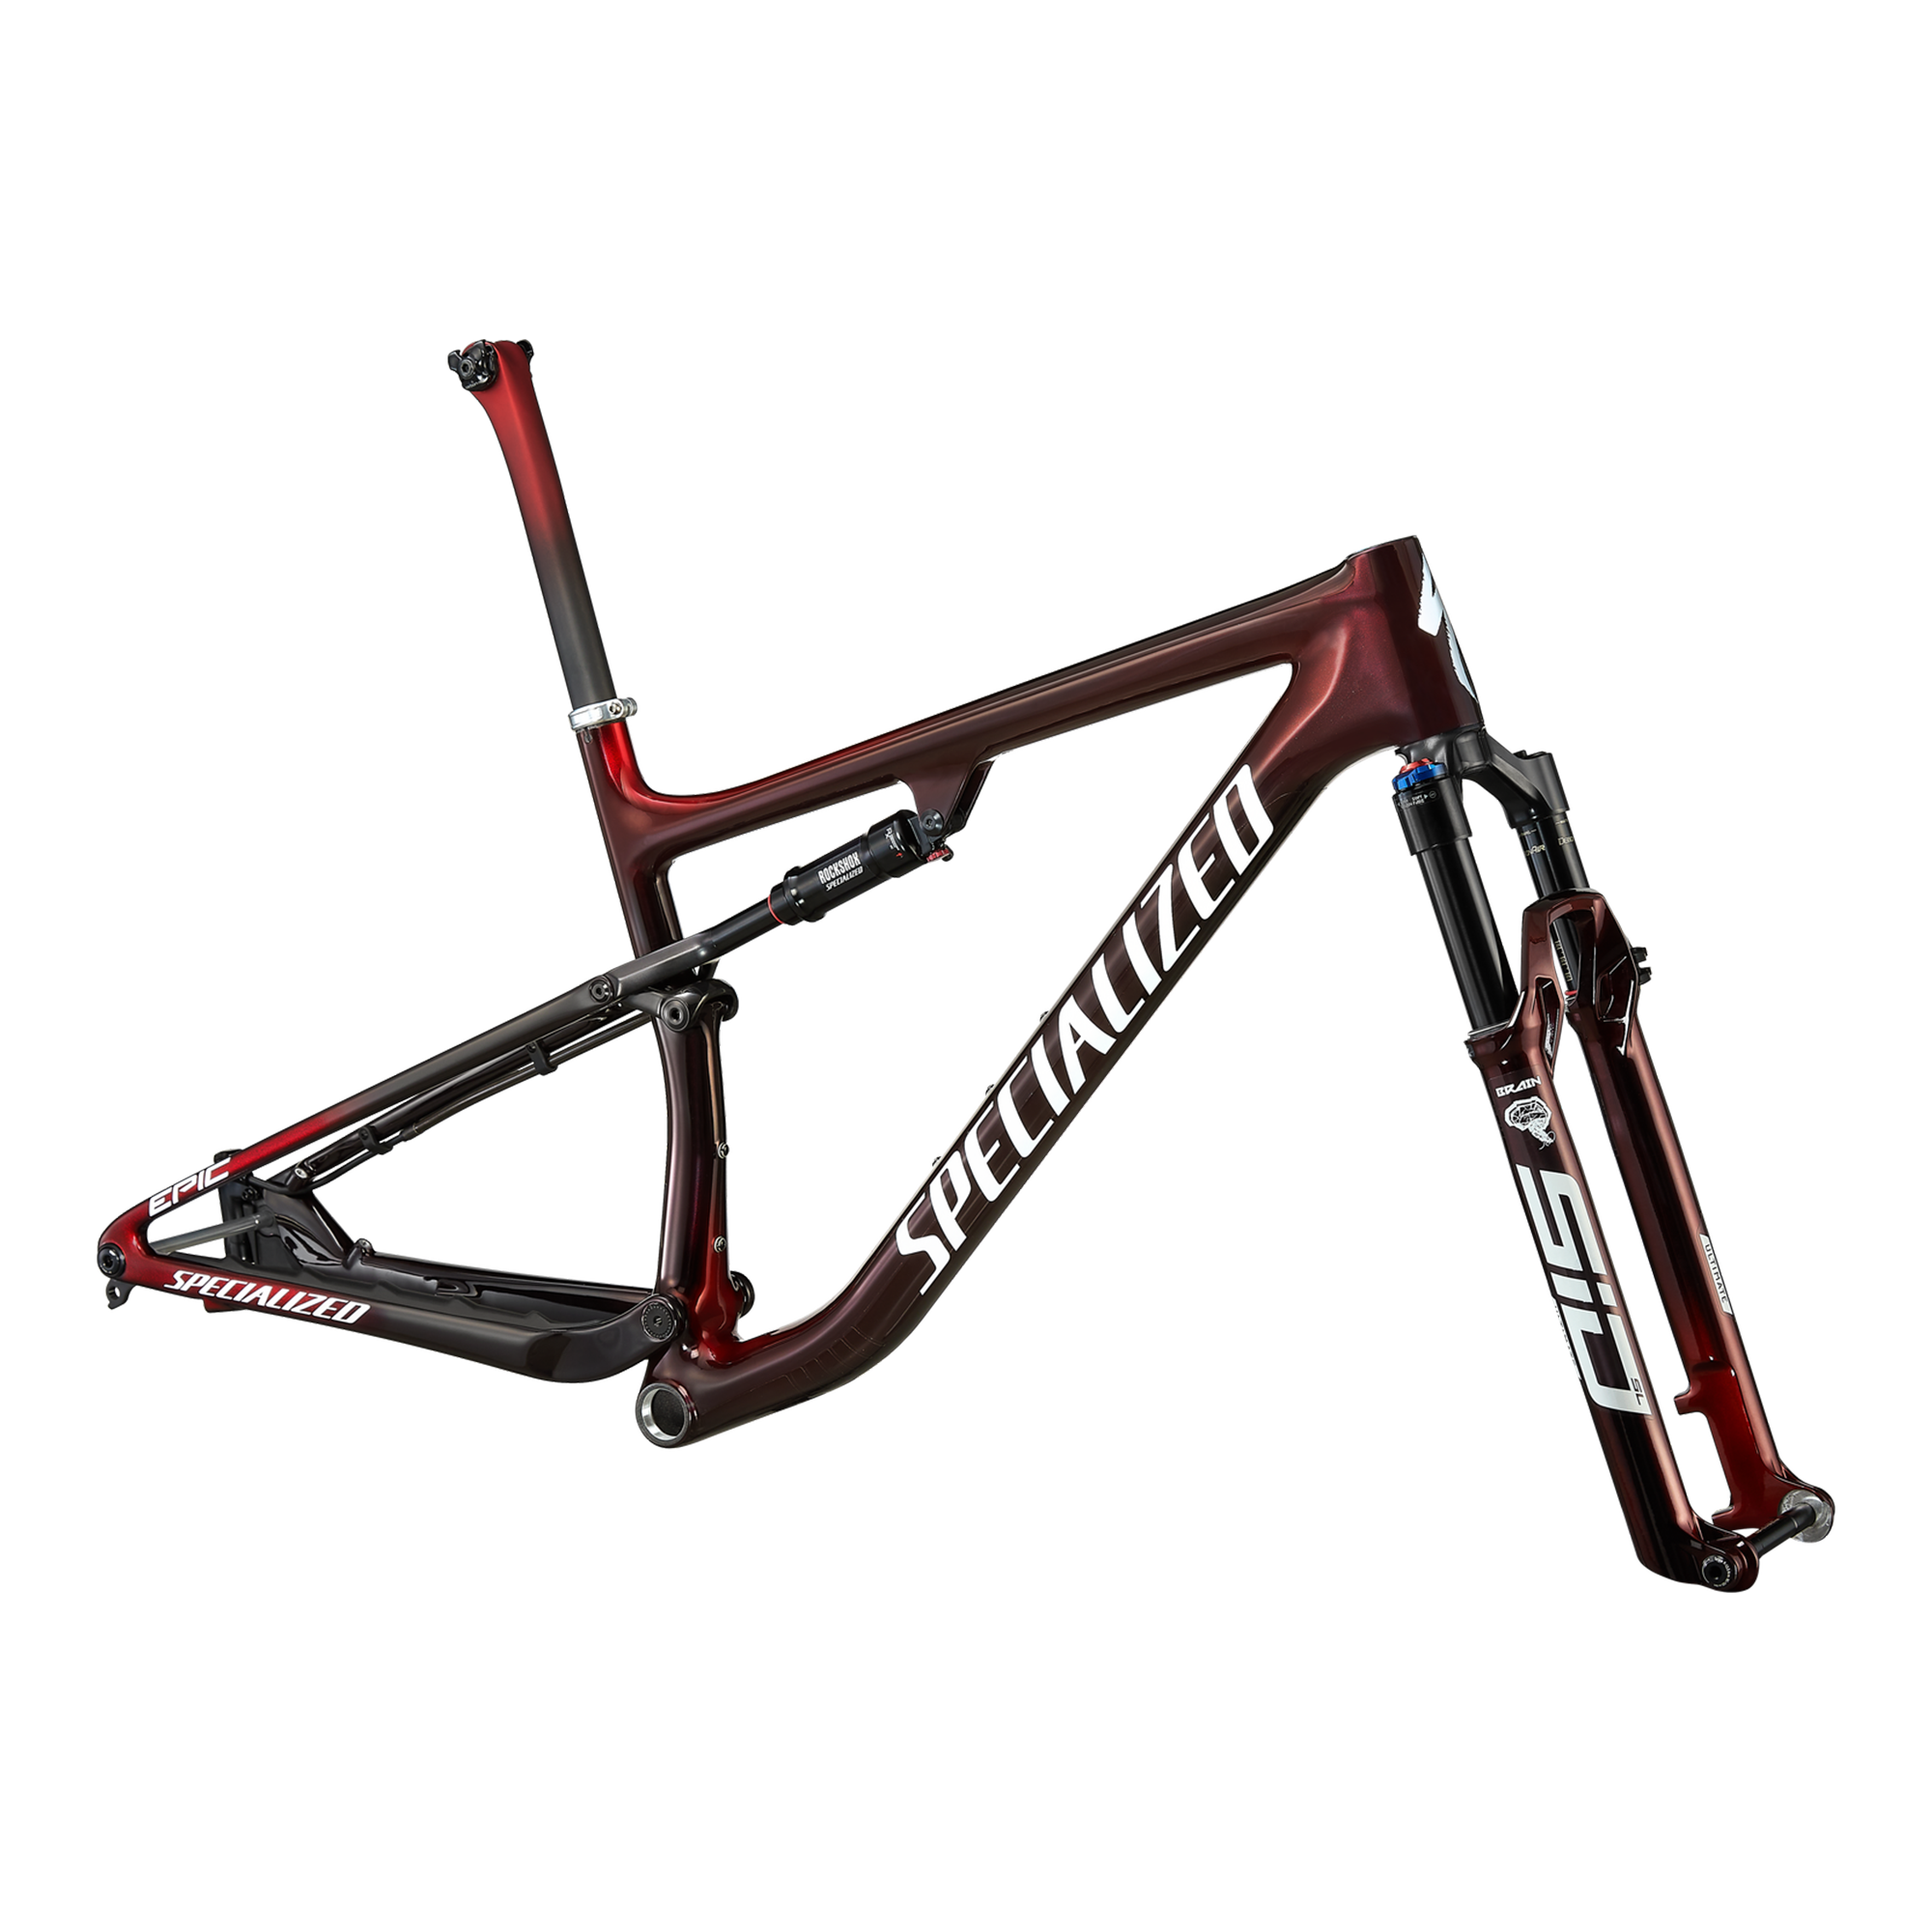 S-Works Epic Frameset - Speed of Light Collection